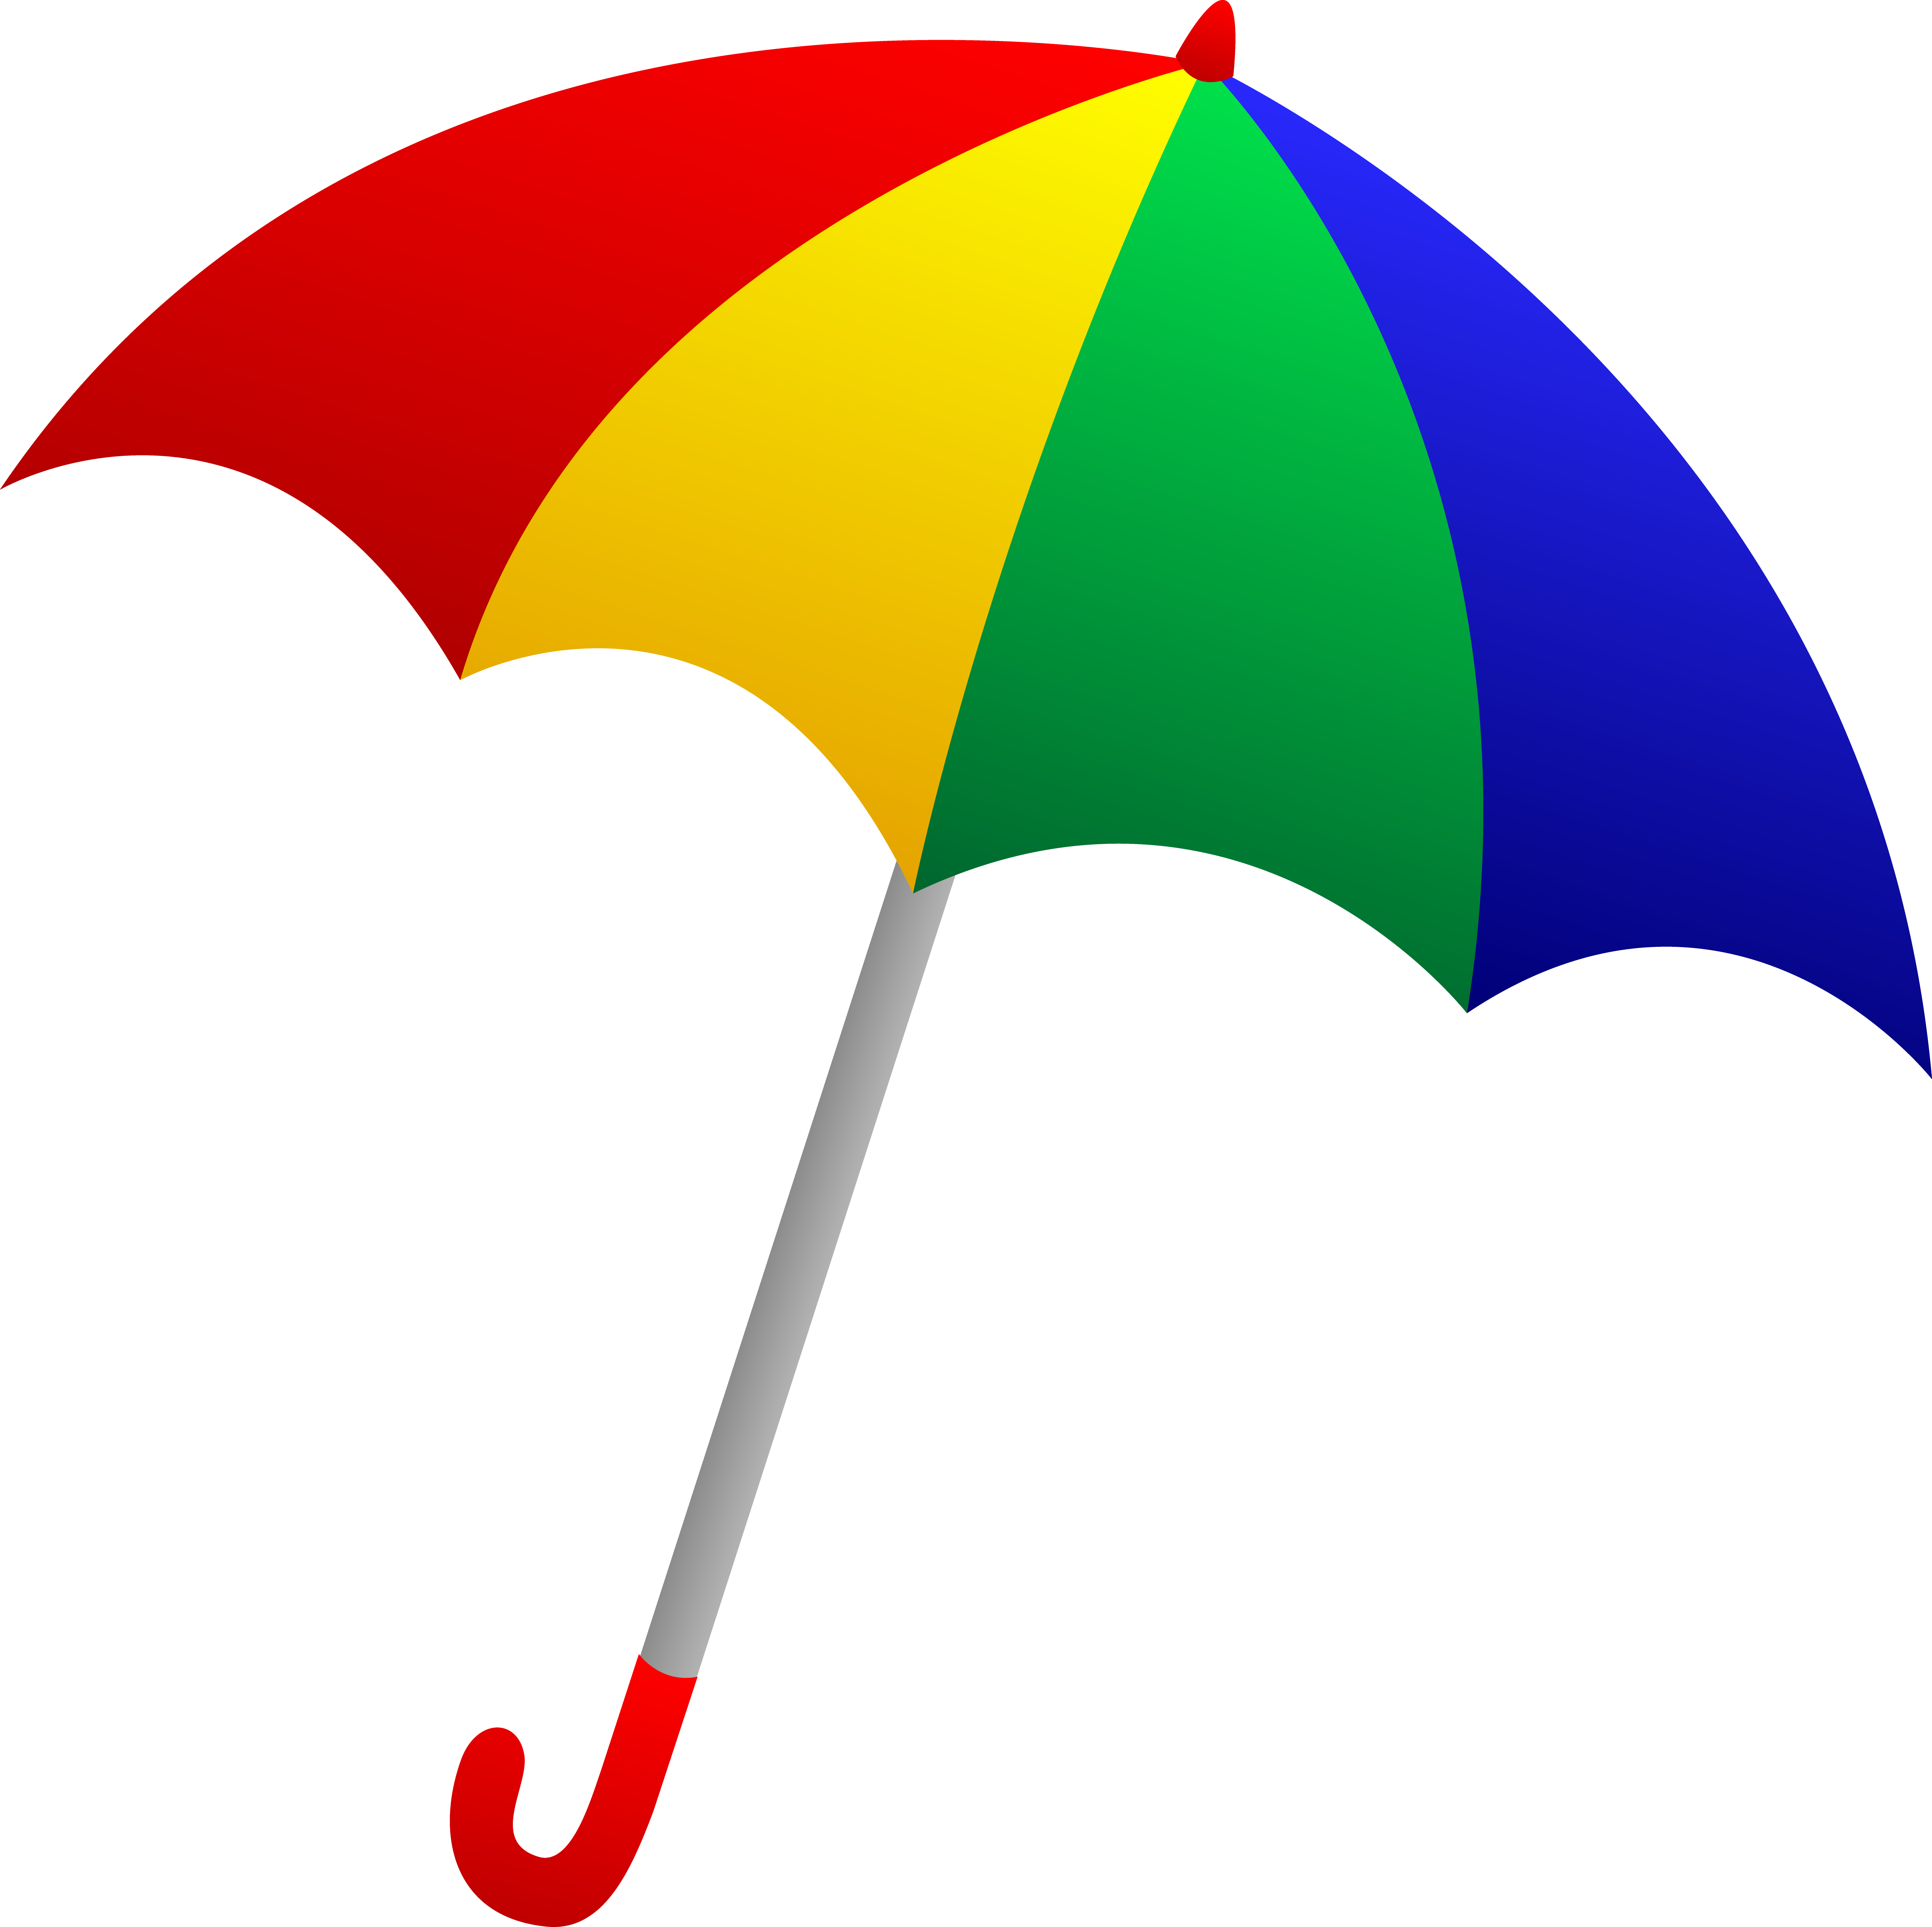 colorful_umbrella_tilted.png